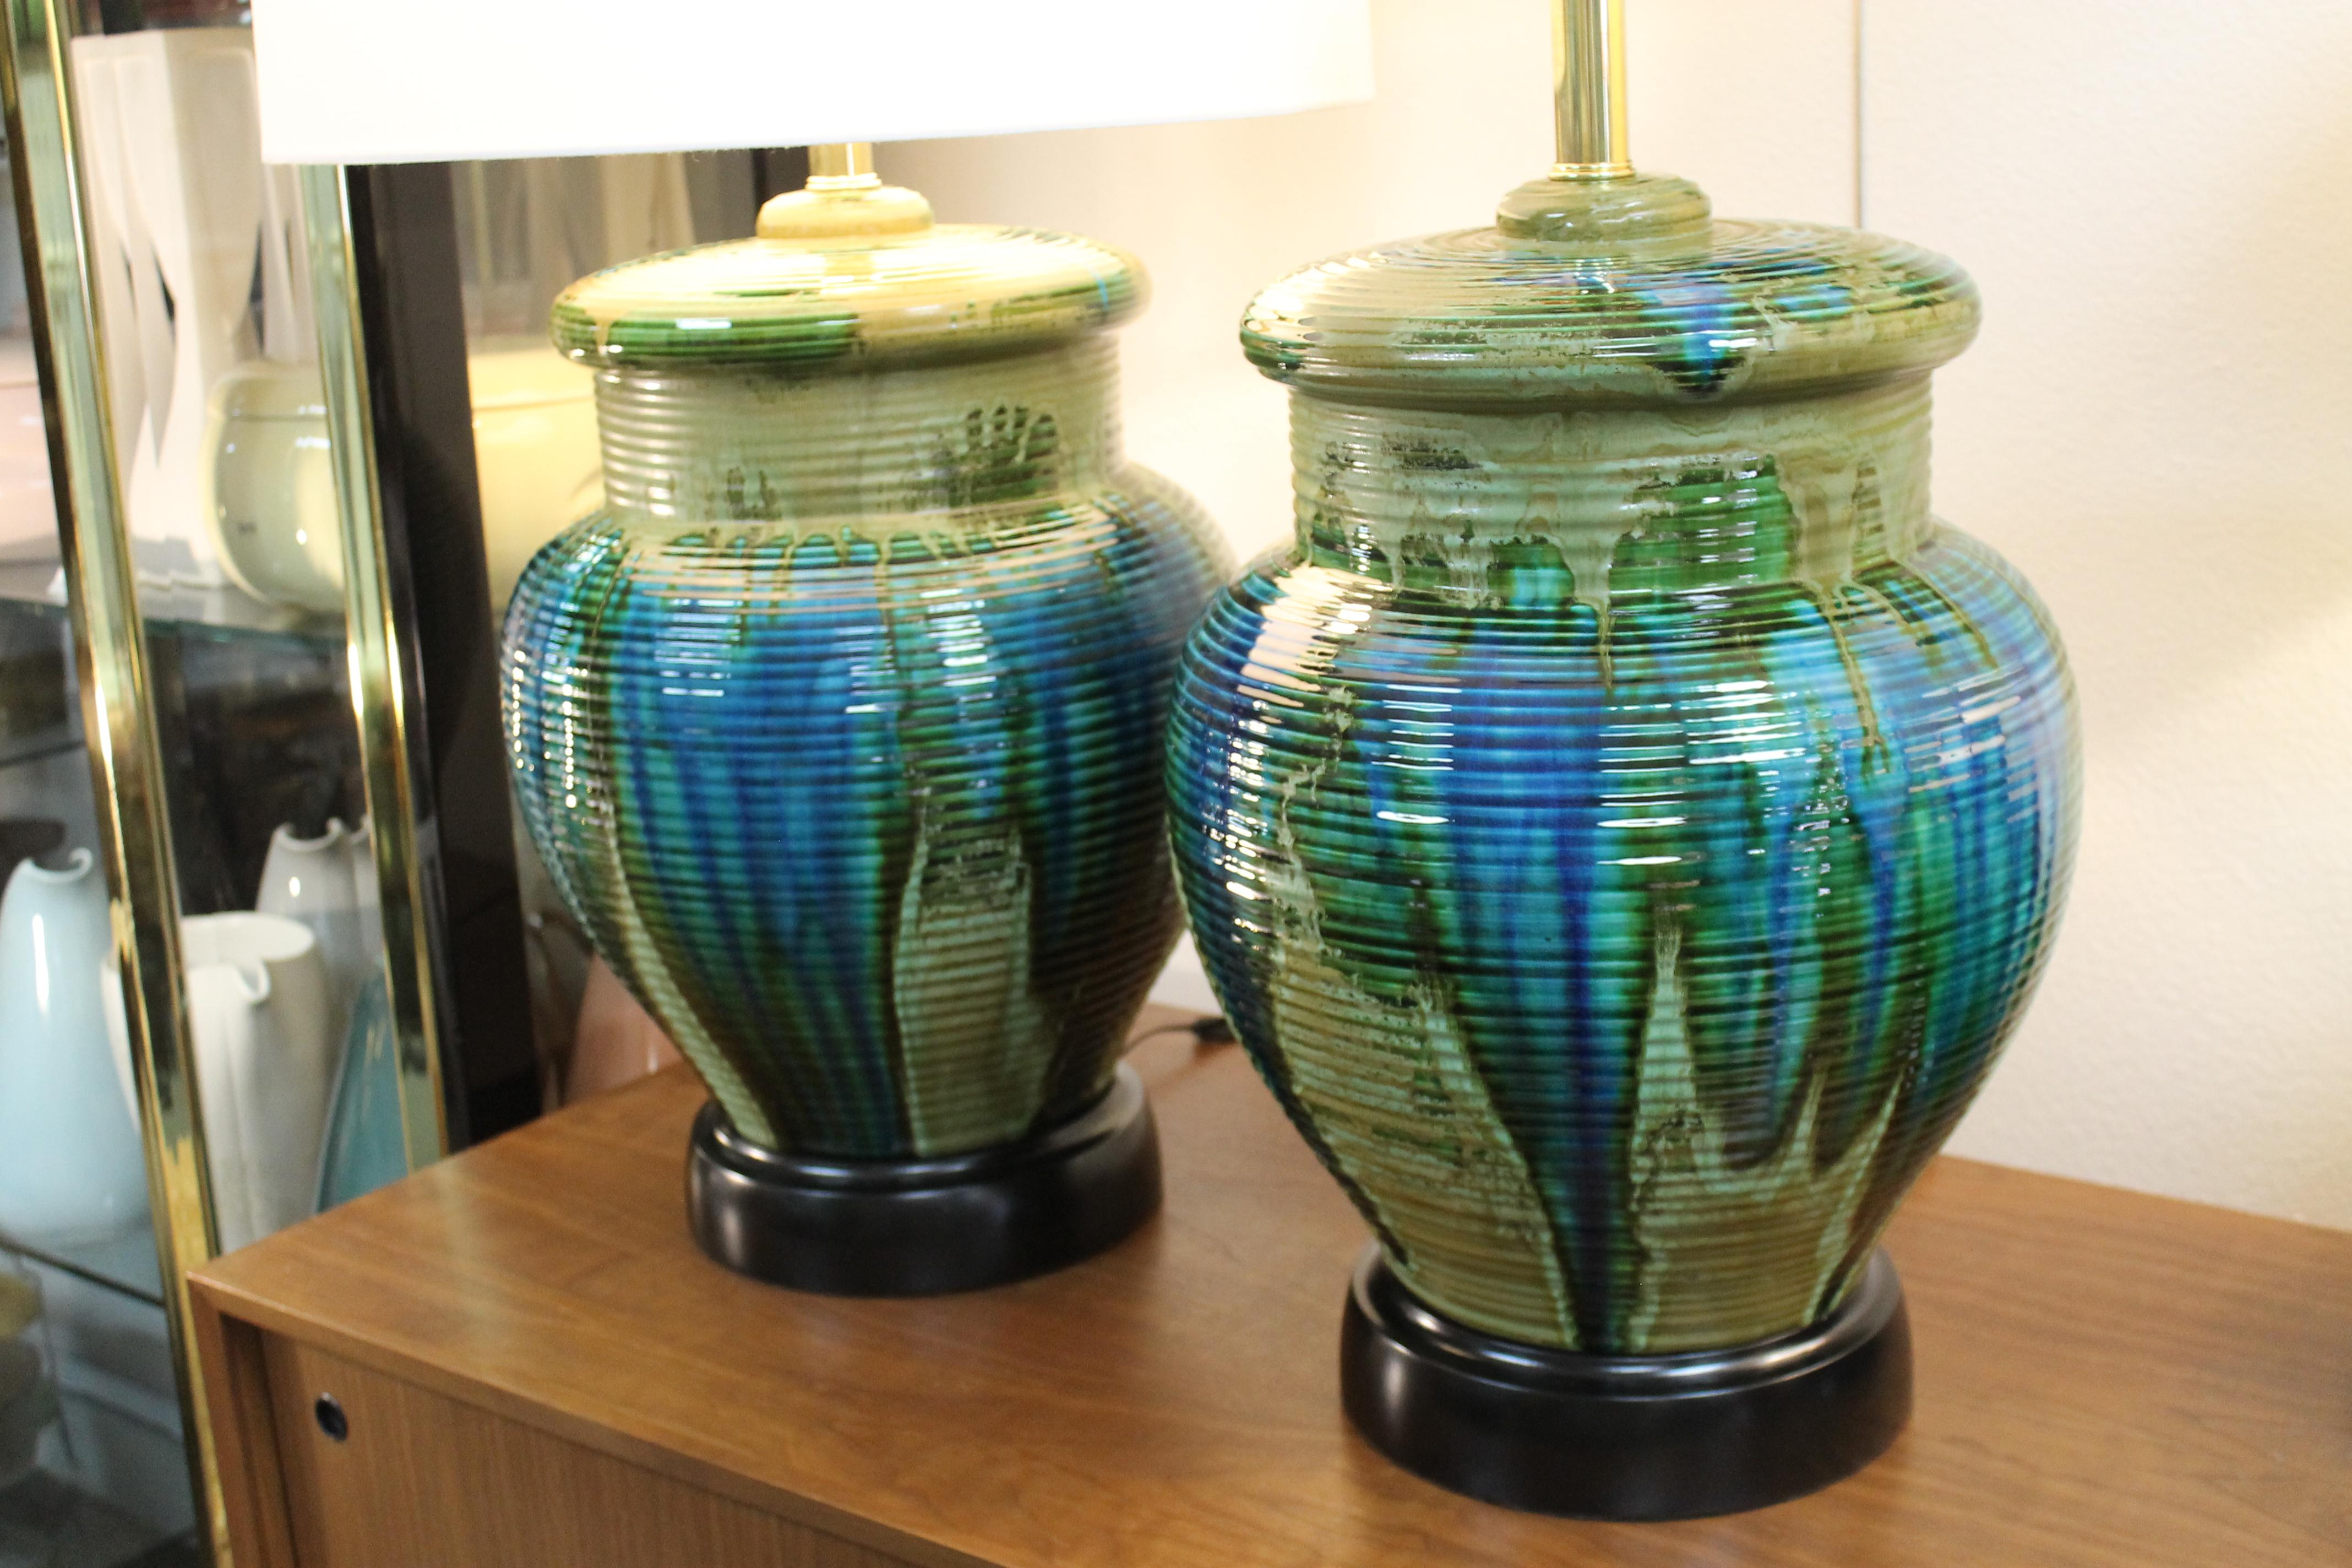 Monumental pair of ceramic lamps. Pottery lamps have abstract patterns of greens, blues, yellows. Lamps have been professionally rewired for a 3 way light bulb. Lamps measure 24.5